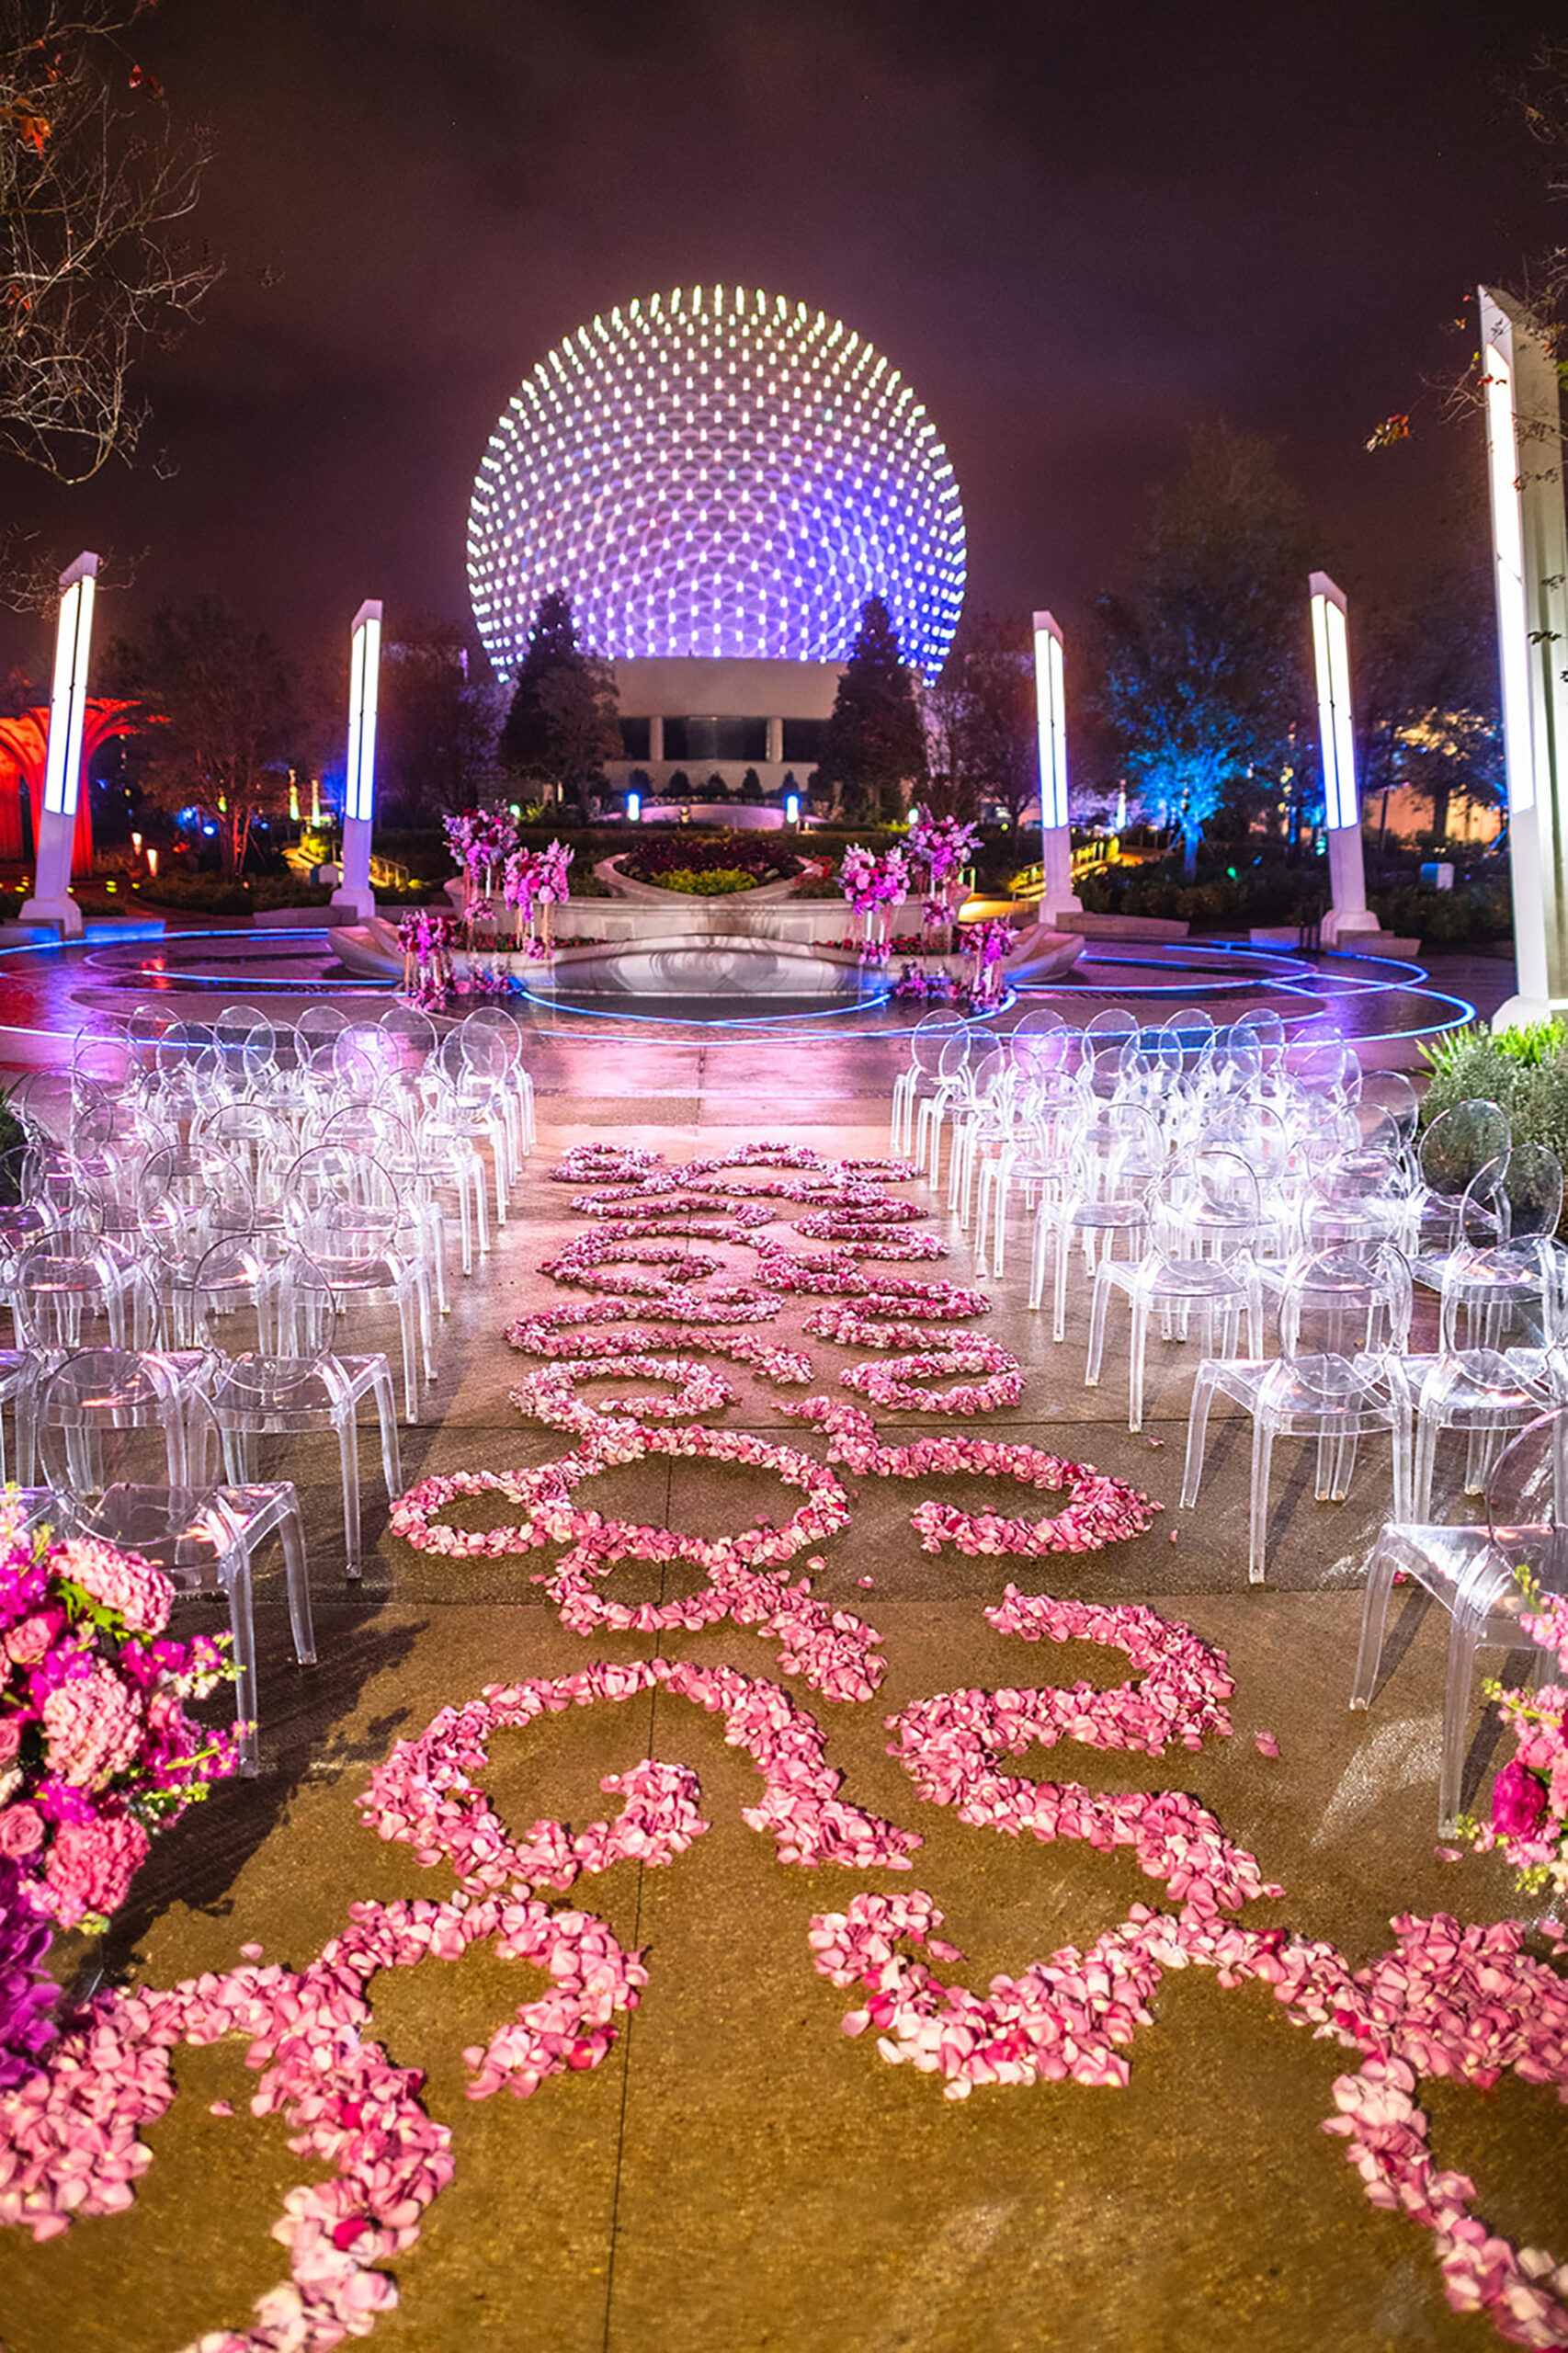 A truly inspired space, World Celebration Gardens represents dreams and connections making it a magical place to honor your love.